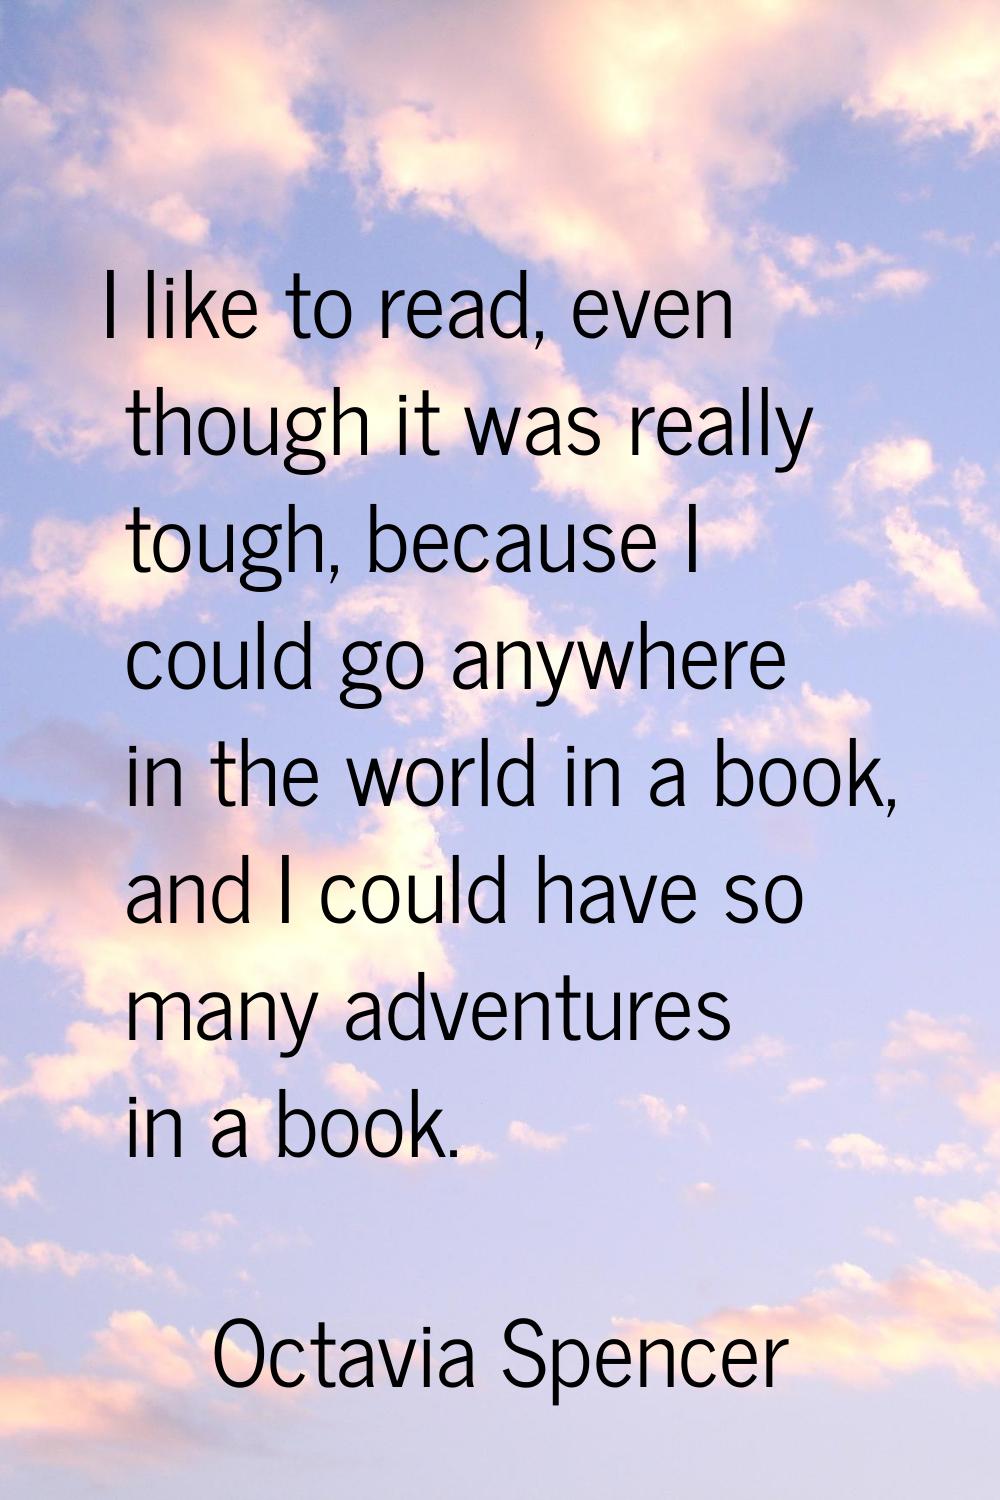 I like to read, even though it was really tough, because I could go anywhere in the world in a book